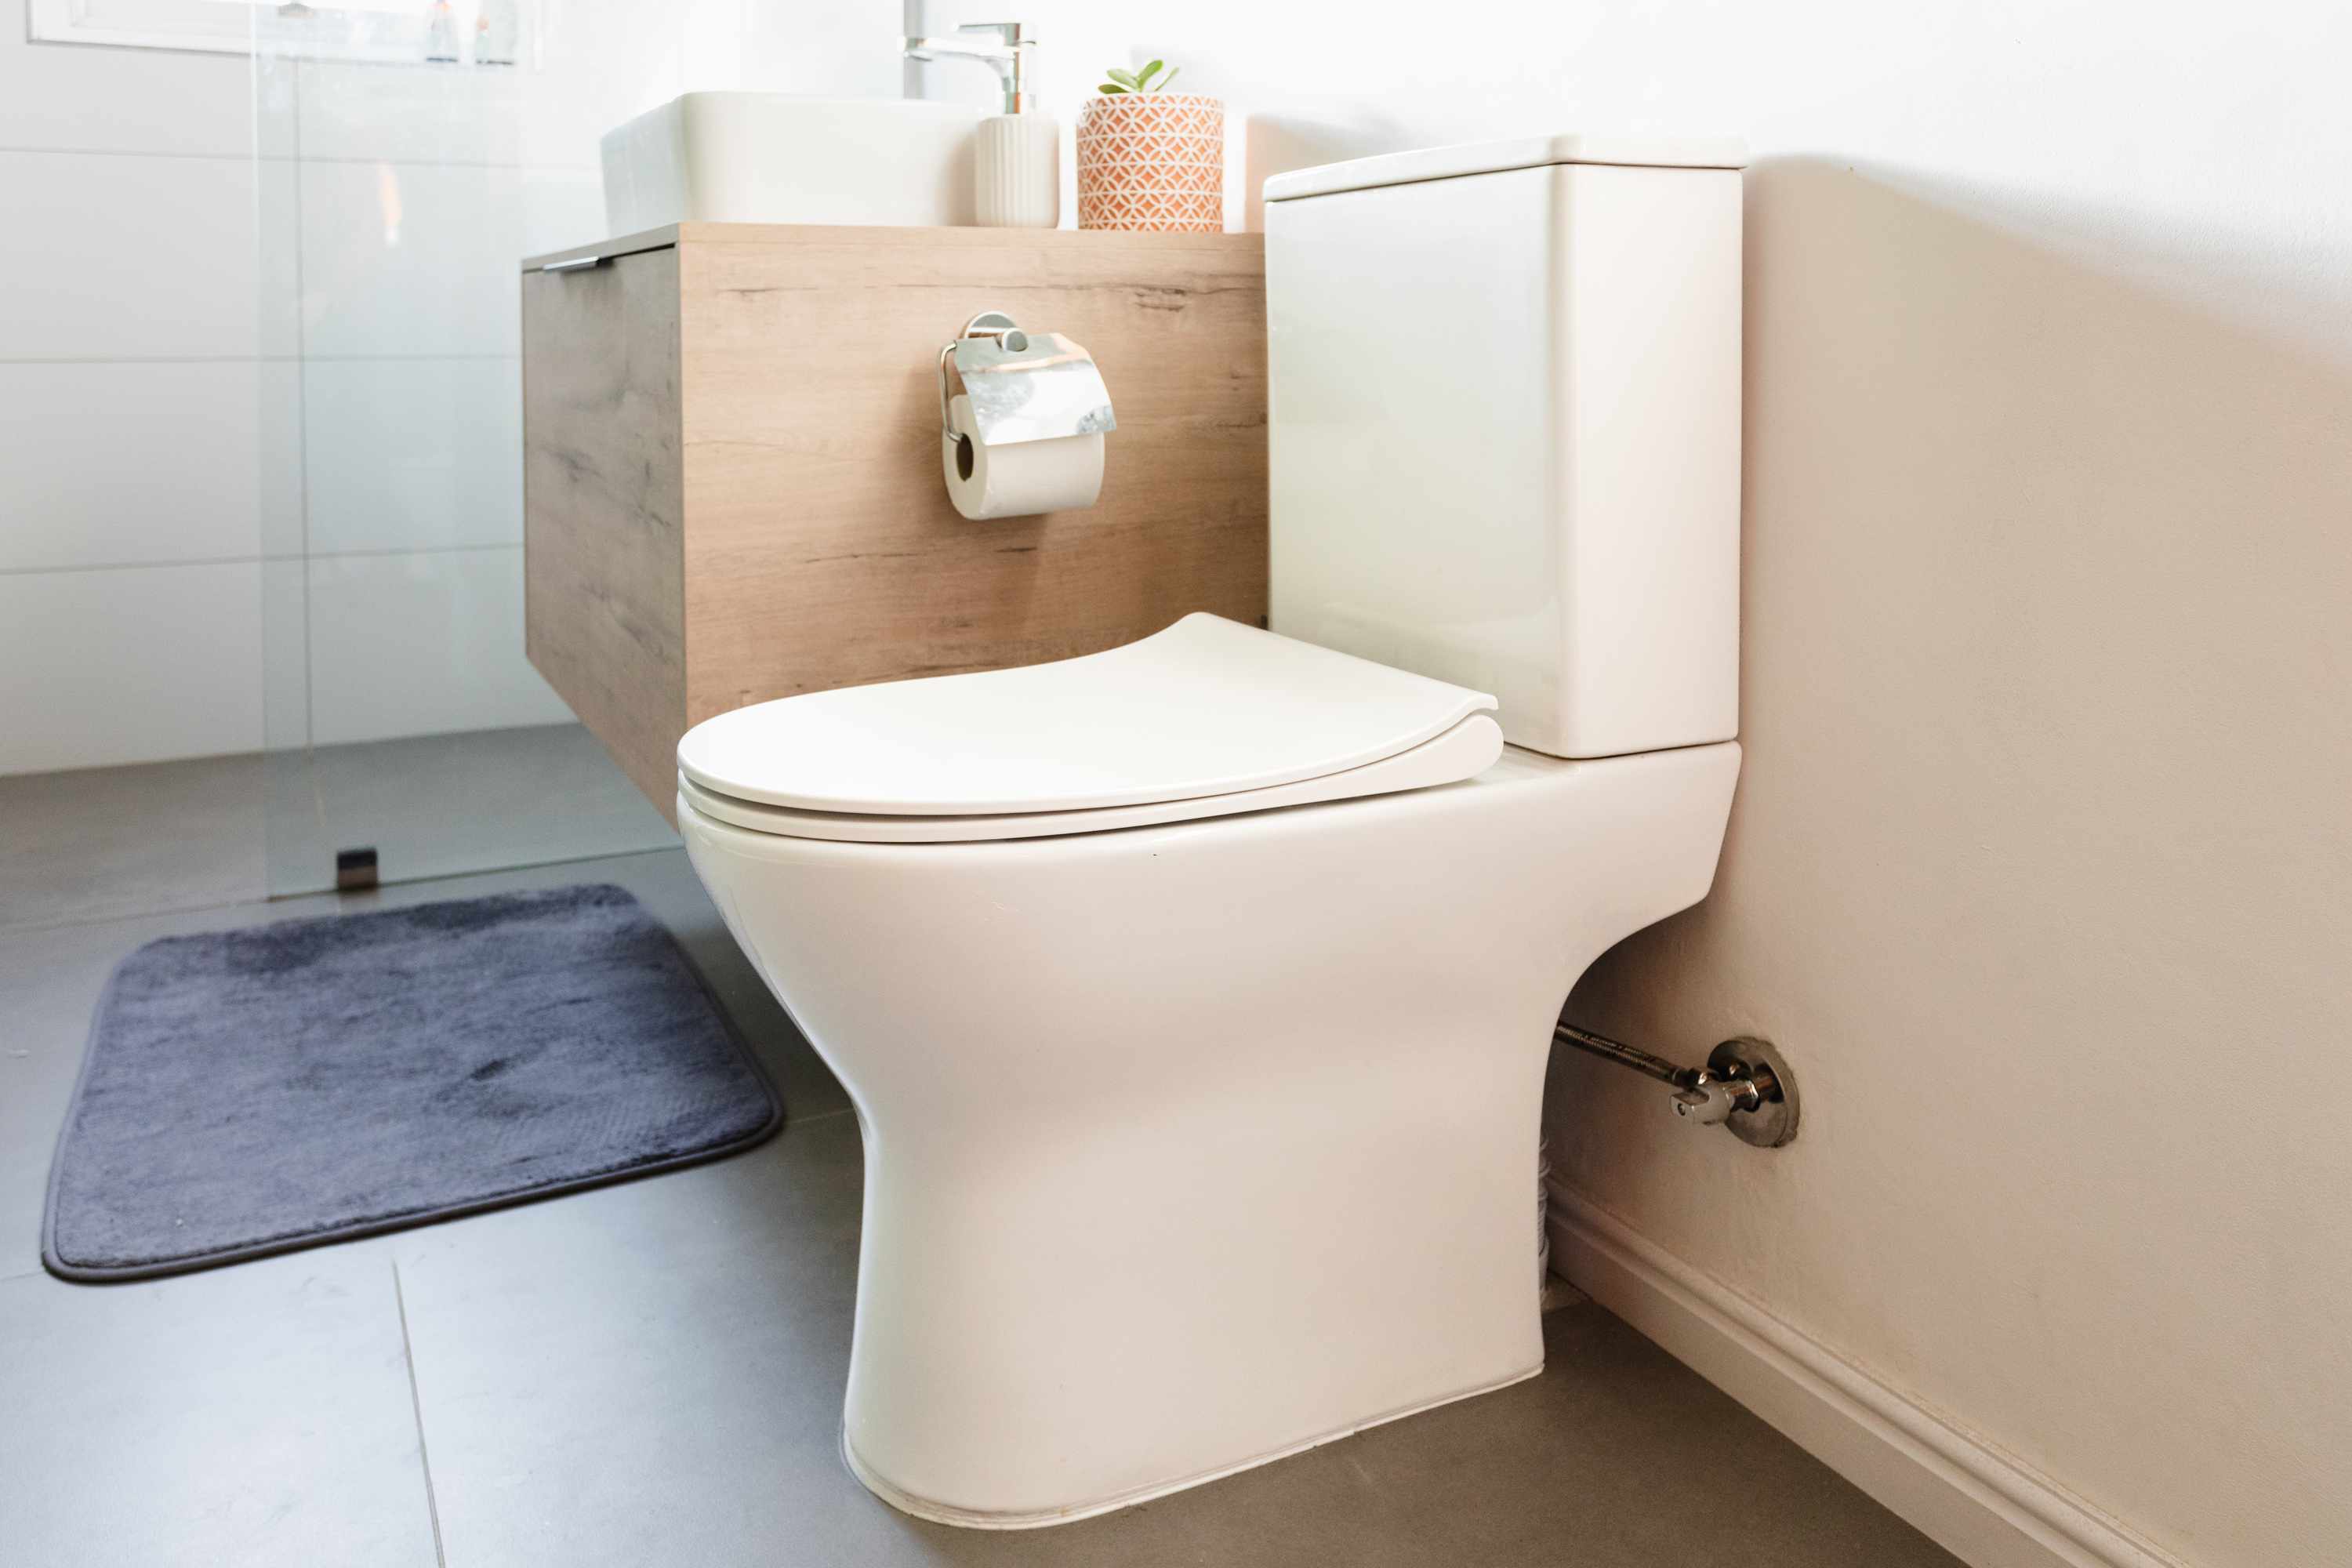 How Often Should You Change Toilet Seat